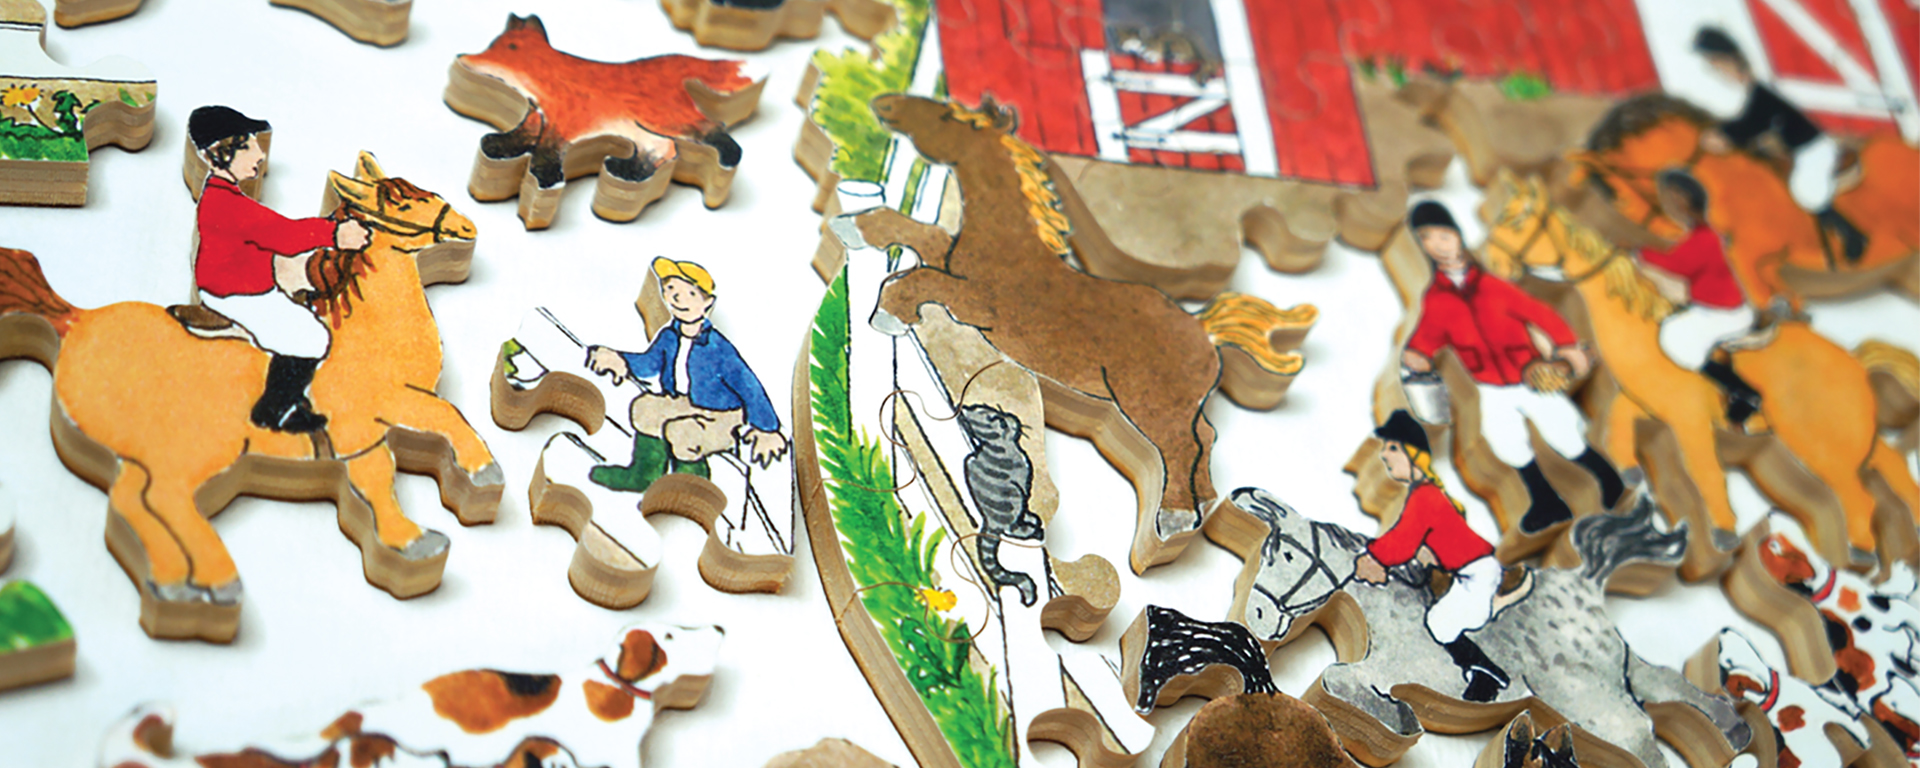 Wooden teaser horse jigsaw puzzle in progress featuring a variety of horse and rider shaped puzzle pieces and a stable.